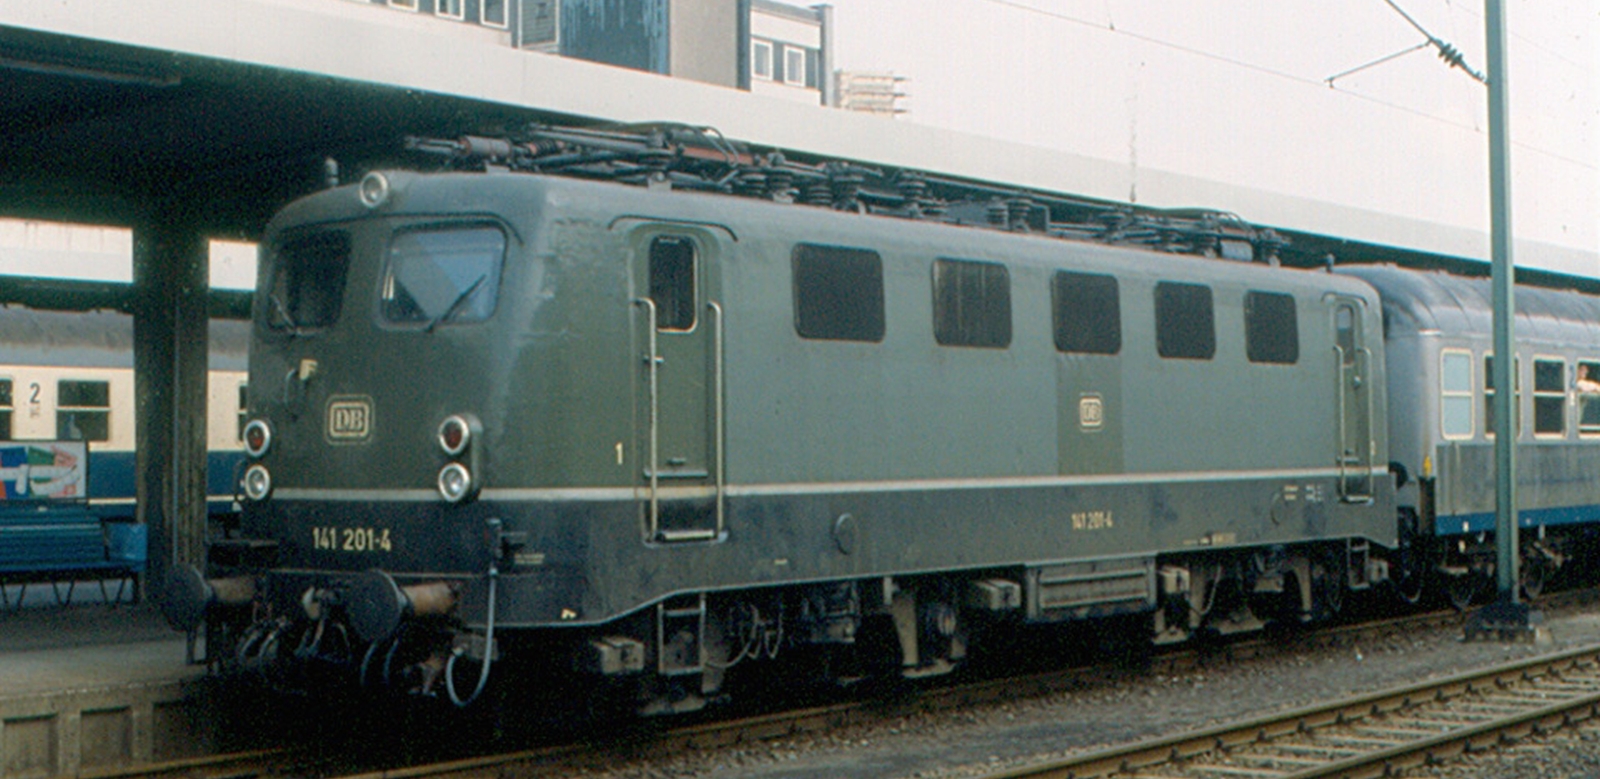 141 201 with Silberling cars in July 1989 in Braunschweig